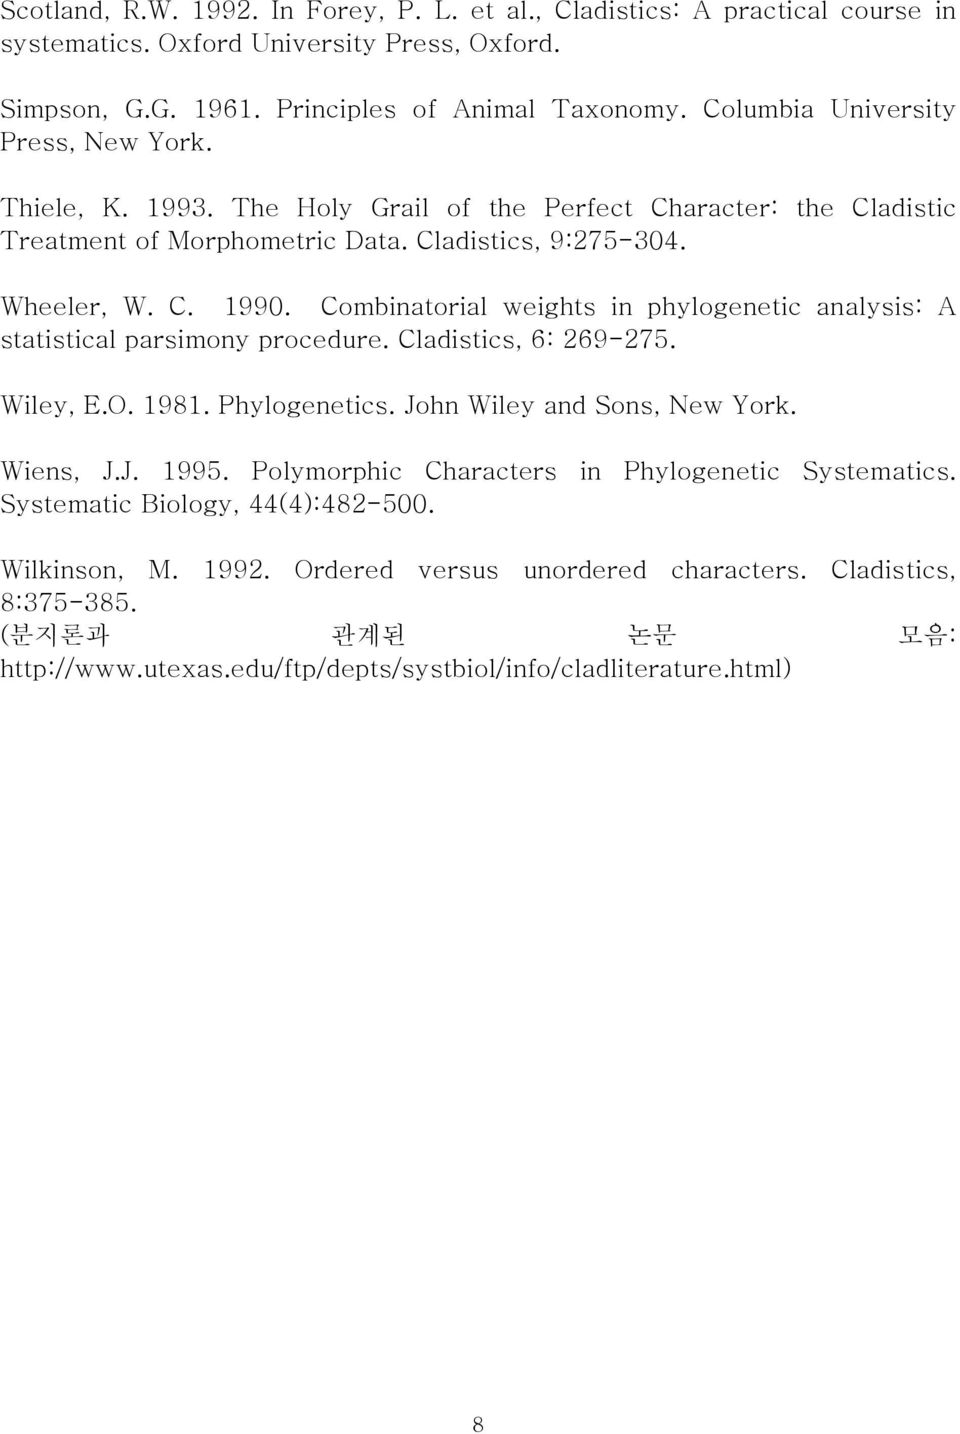 Combinatorial weights in phylogenetic analysis: A statistical parsimony procedure. Cladistics, 6: 269-275. Wiley, E.O. 1981. Phylogenetics. John Wiley and Sons, New York. Wiens, J.J. 1995.